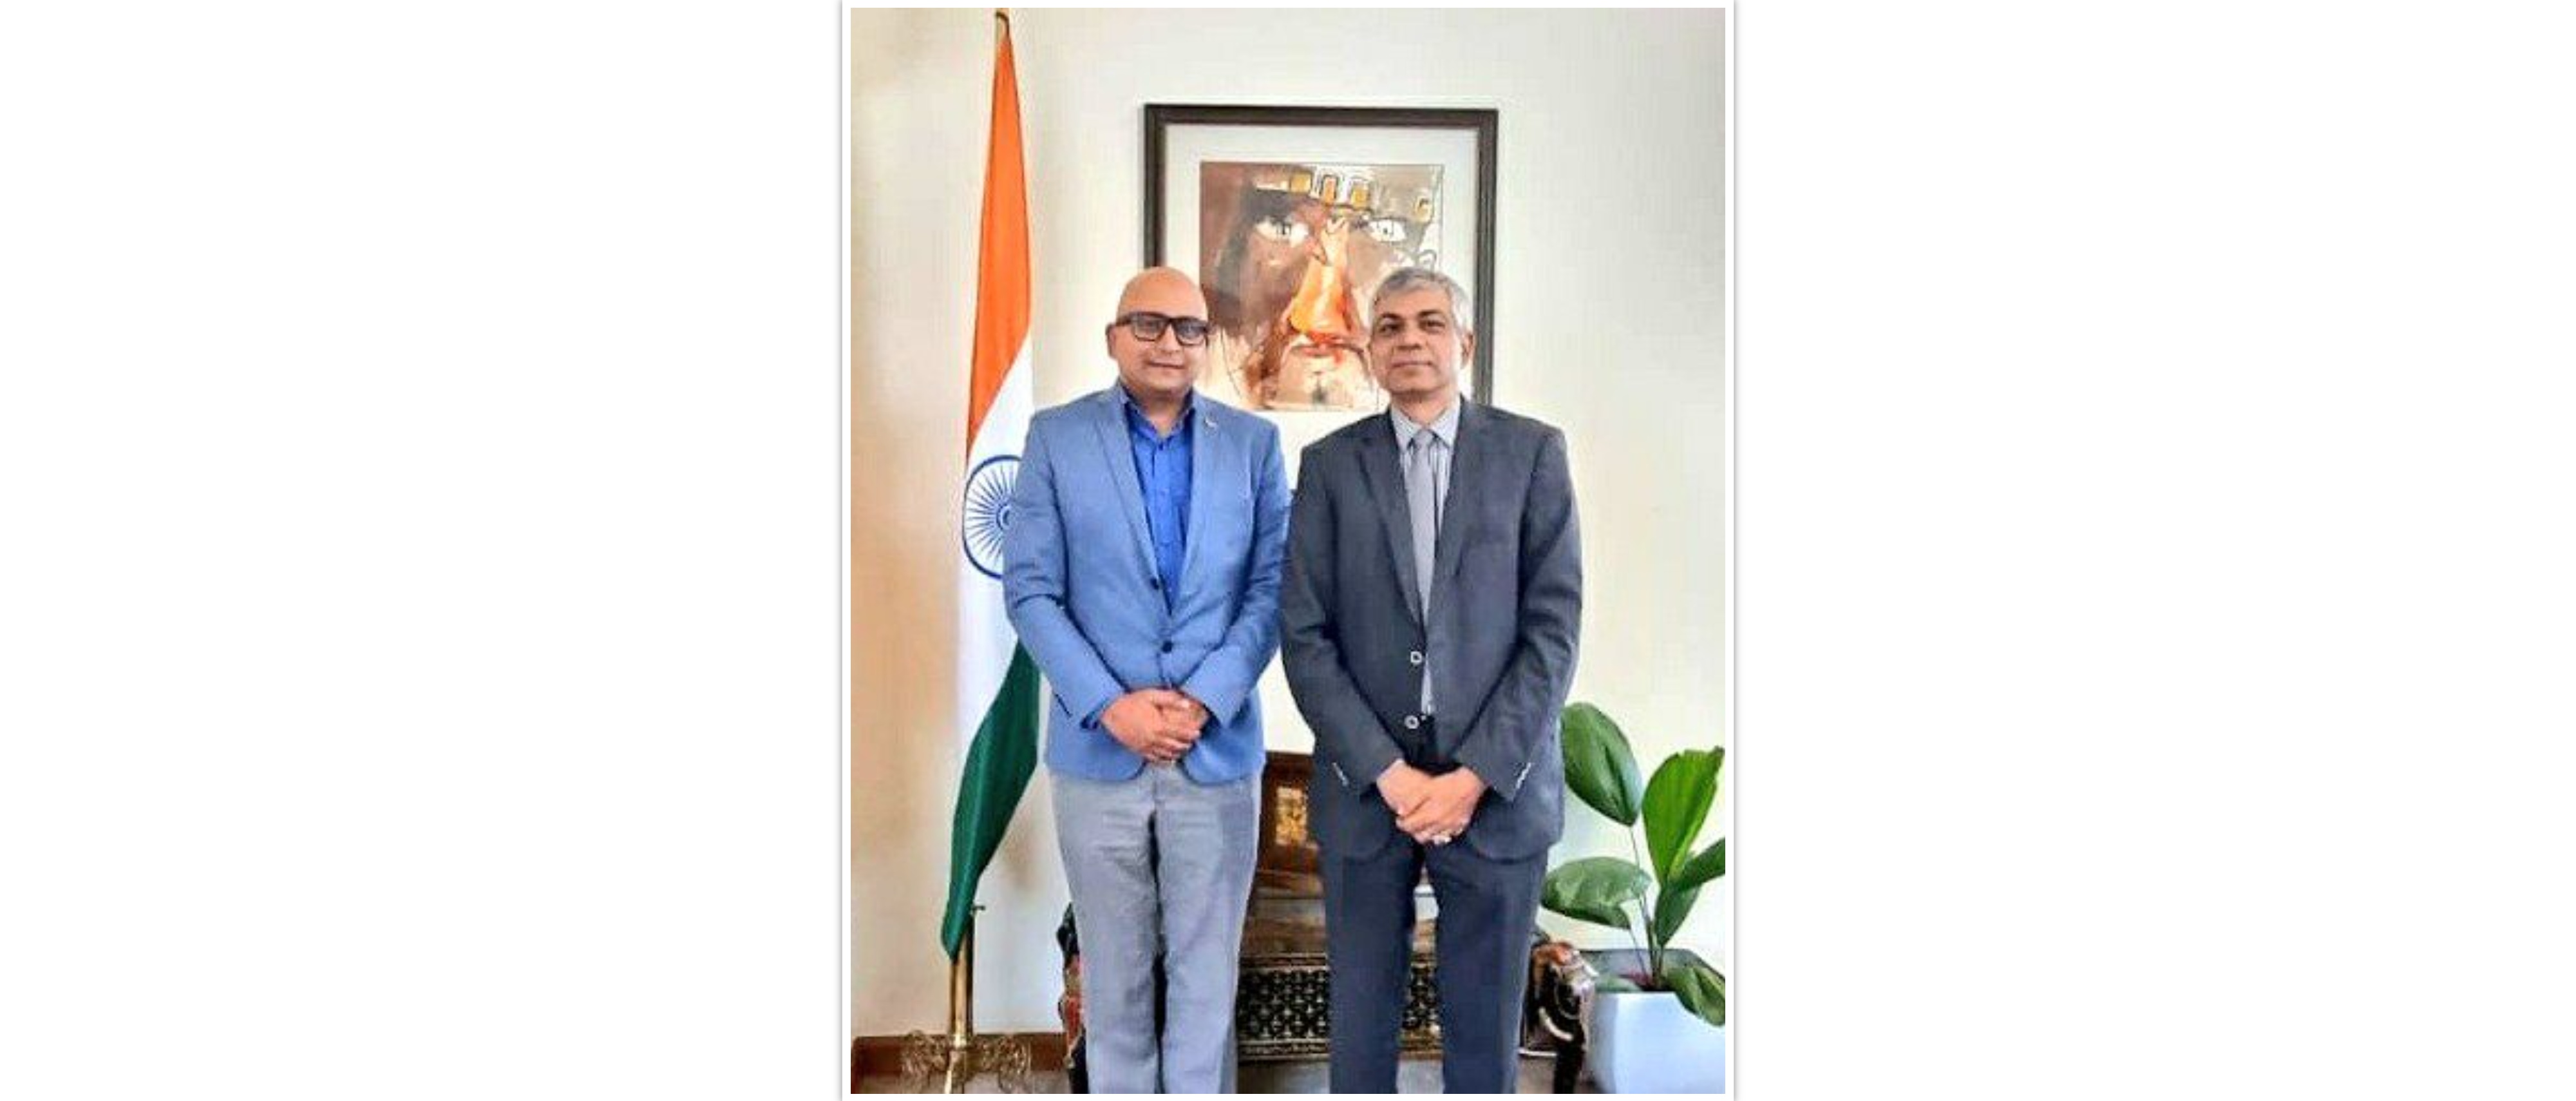  <div style="fcolor: #fff; font-weight: 600; font-size: 1.5em;">
<p style="font-size: 13.8px;">Ambassador Pankaj Sharma met with the Regional Director of the Indo-Latin American Chamber of Commerce, Mr. Amiya Kumar.

Discussed expanding the business opportunities between India  & Mexico, and increasing networking amongst various chambers in both countries.
<br /><span style="text-align: center;">27 September 2022</span></p>
</div>